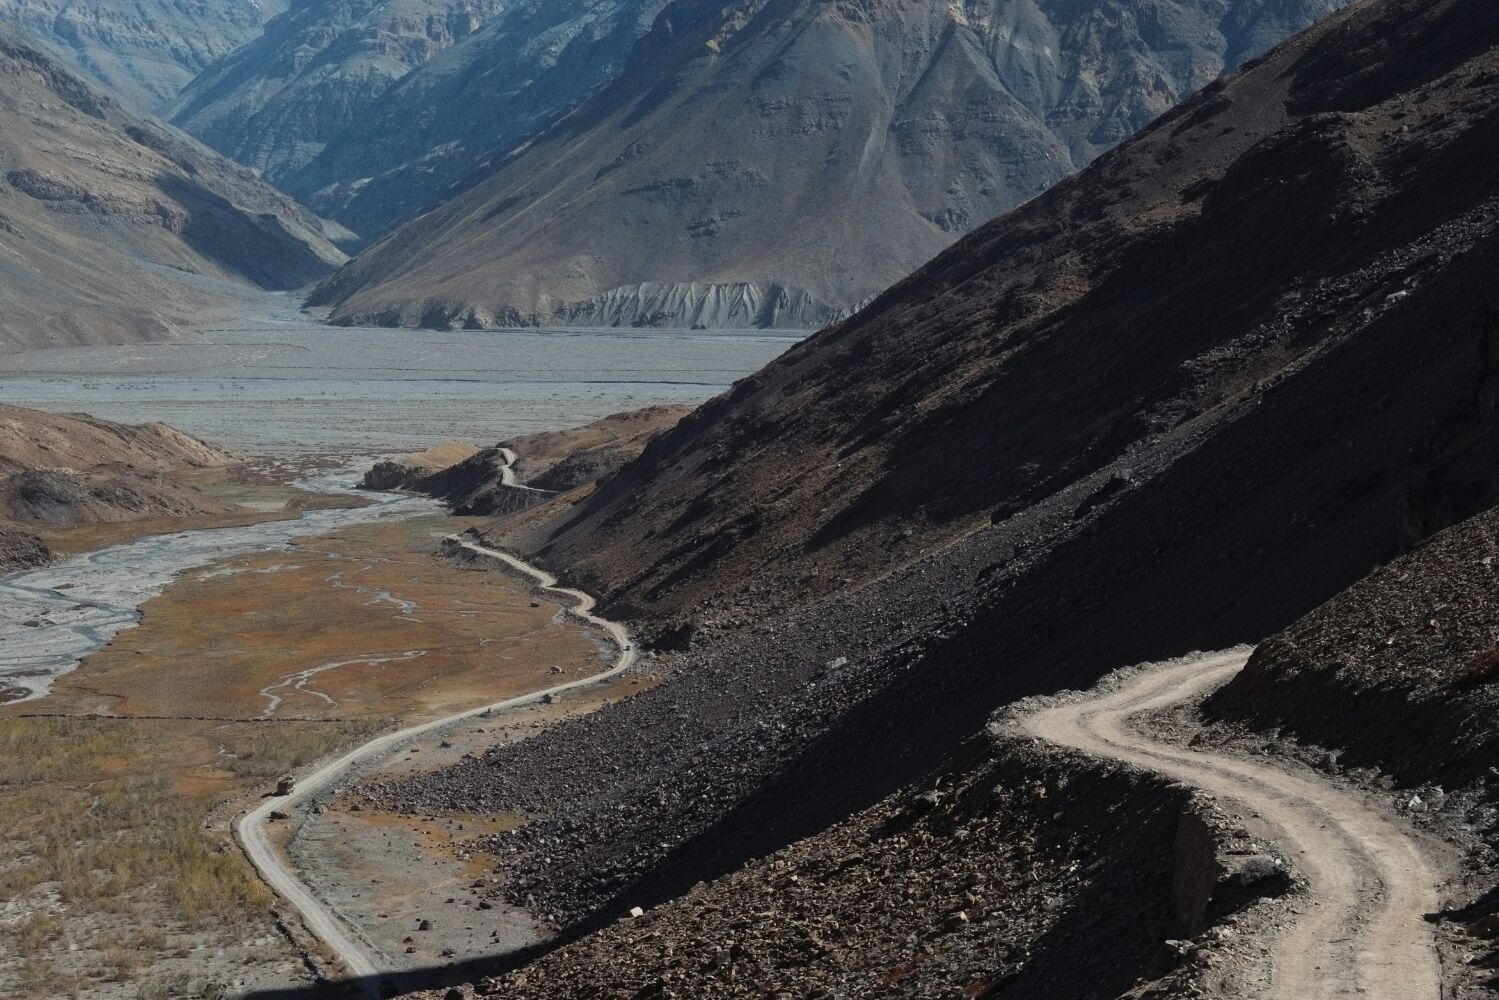 The lower slopes of the Kunzum La. It is not a difficult climb, mostly hardpacked dirt with just a few spots of mud and loose rock to negotiate. It climbs just 500m or so in 11km, with only a few very steep sections. Looking back down the climb was also my final view of the rather wonderful Spiti Valley.